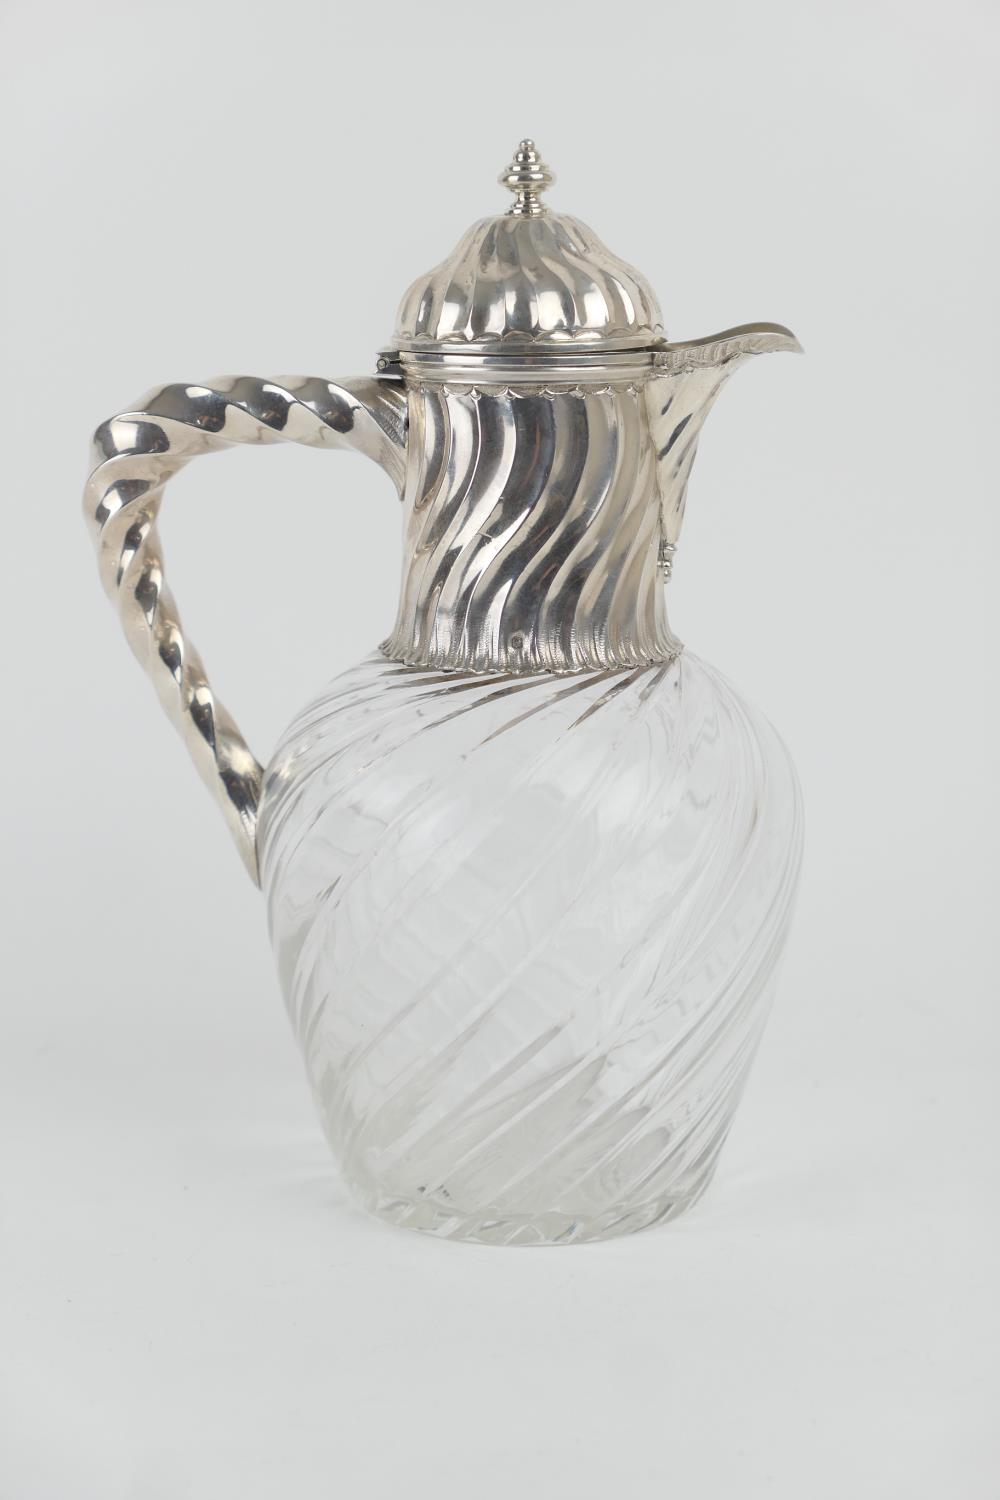 French silver mounted claret jug, circa 1900, domed, hinged cover over a wrythen fluted collar and